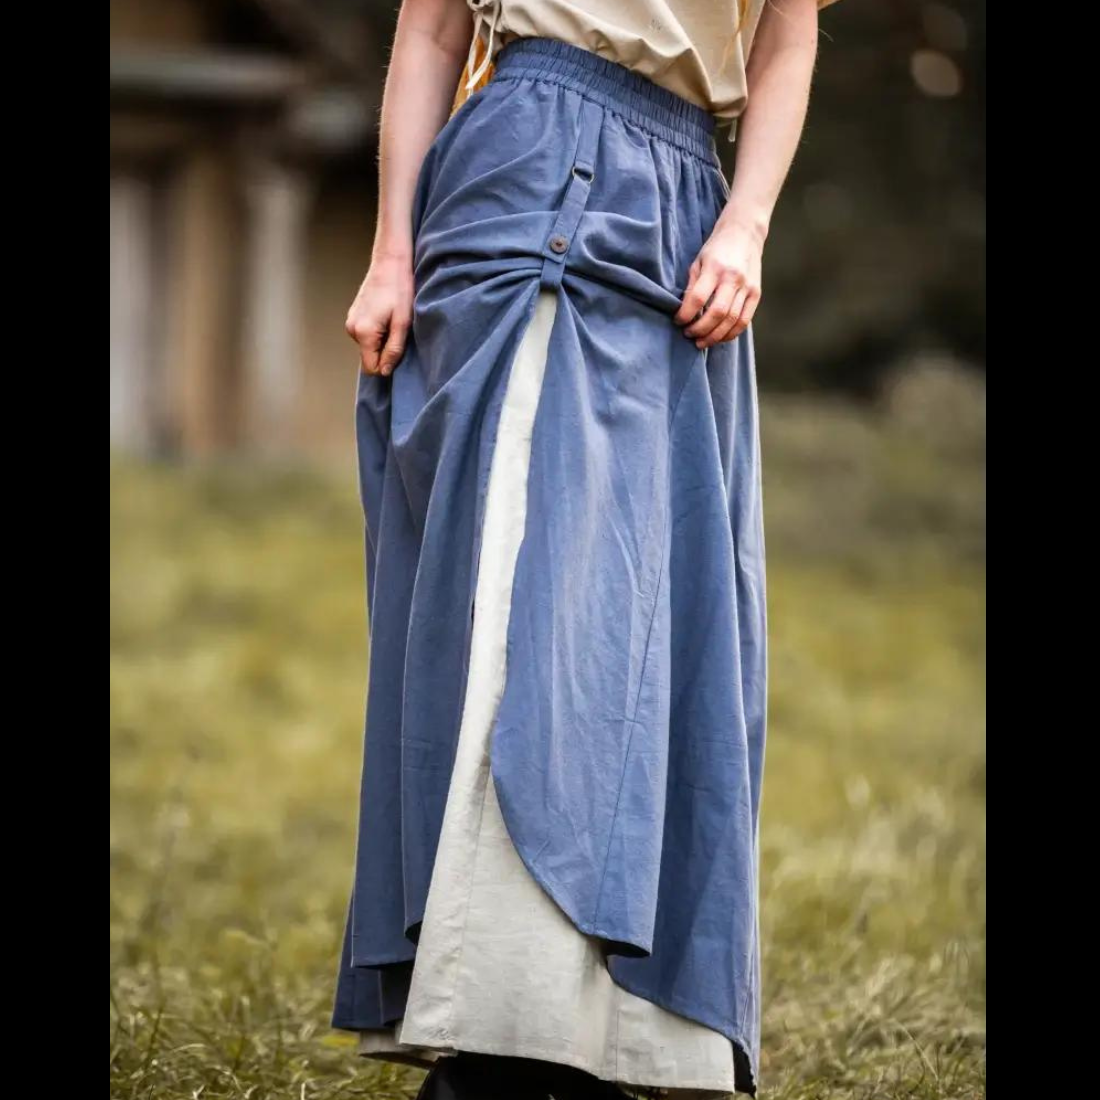 Viking Skirt Double Layer in Blue and Natural with Slit